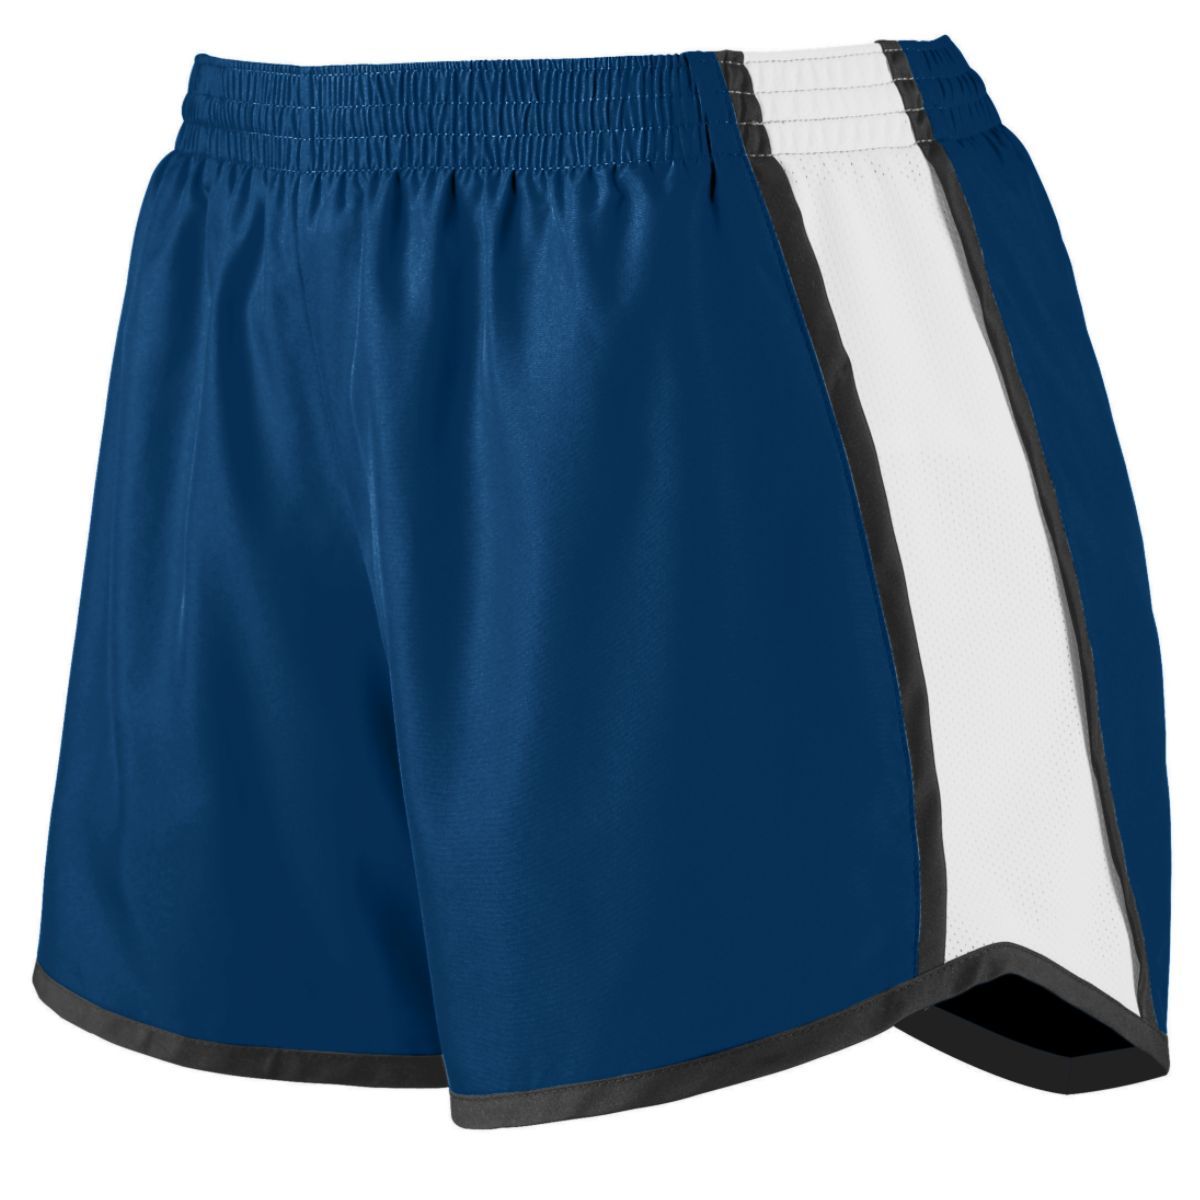 Augusta Sportswear Ladies Pulse Shorts in Navy/White/Black  -Part of the Ladies, Ladies-Shorts, Augusta-Products, Volleyball product lines at KanaleyCreations.com